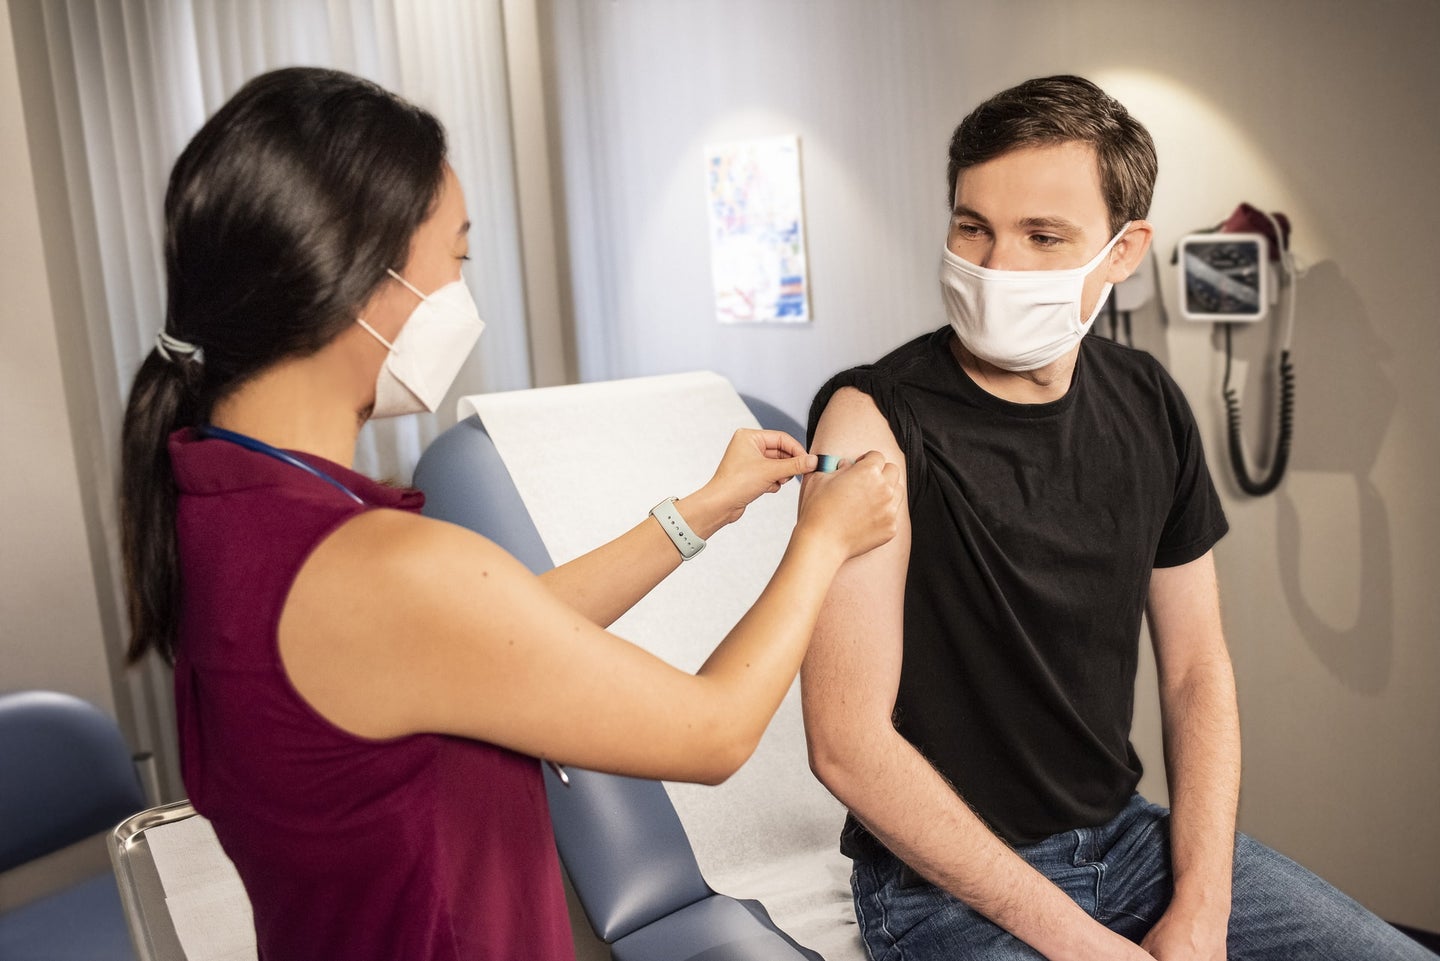 A woman gives a COVID-19 vaccine shot to a young person while both wear masks